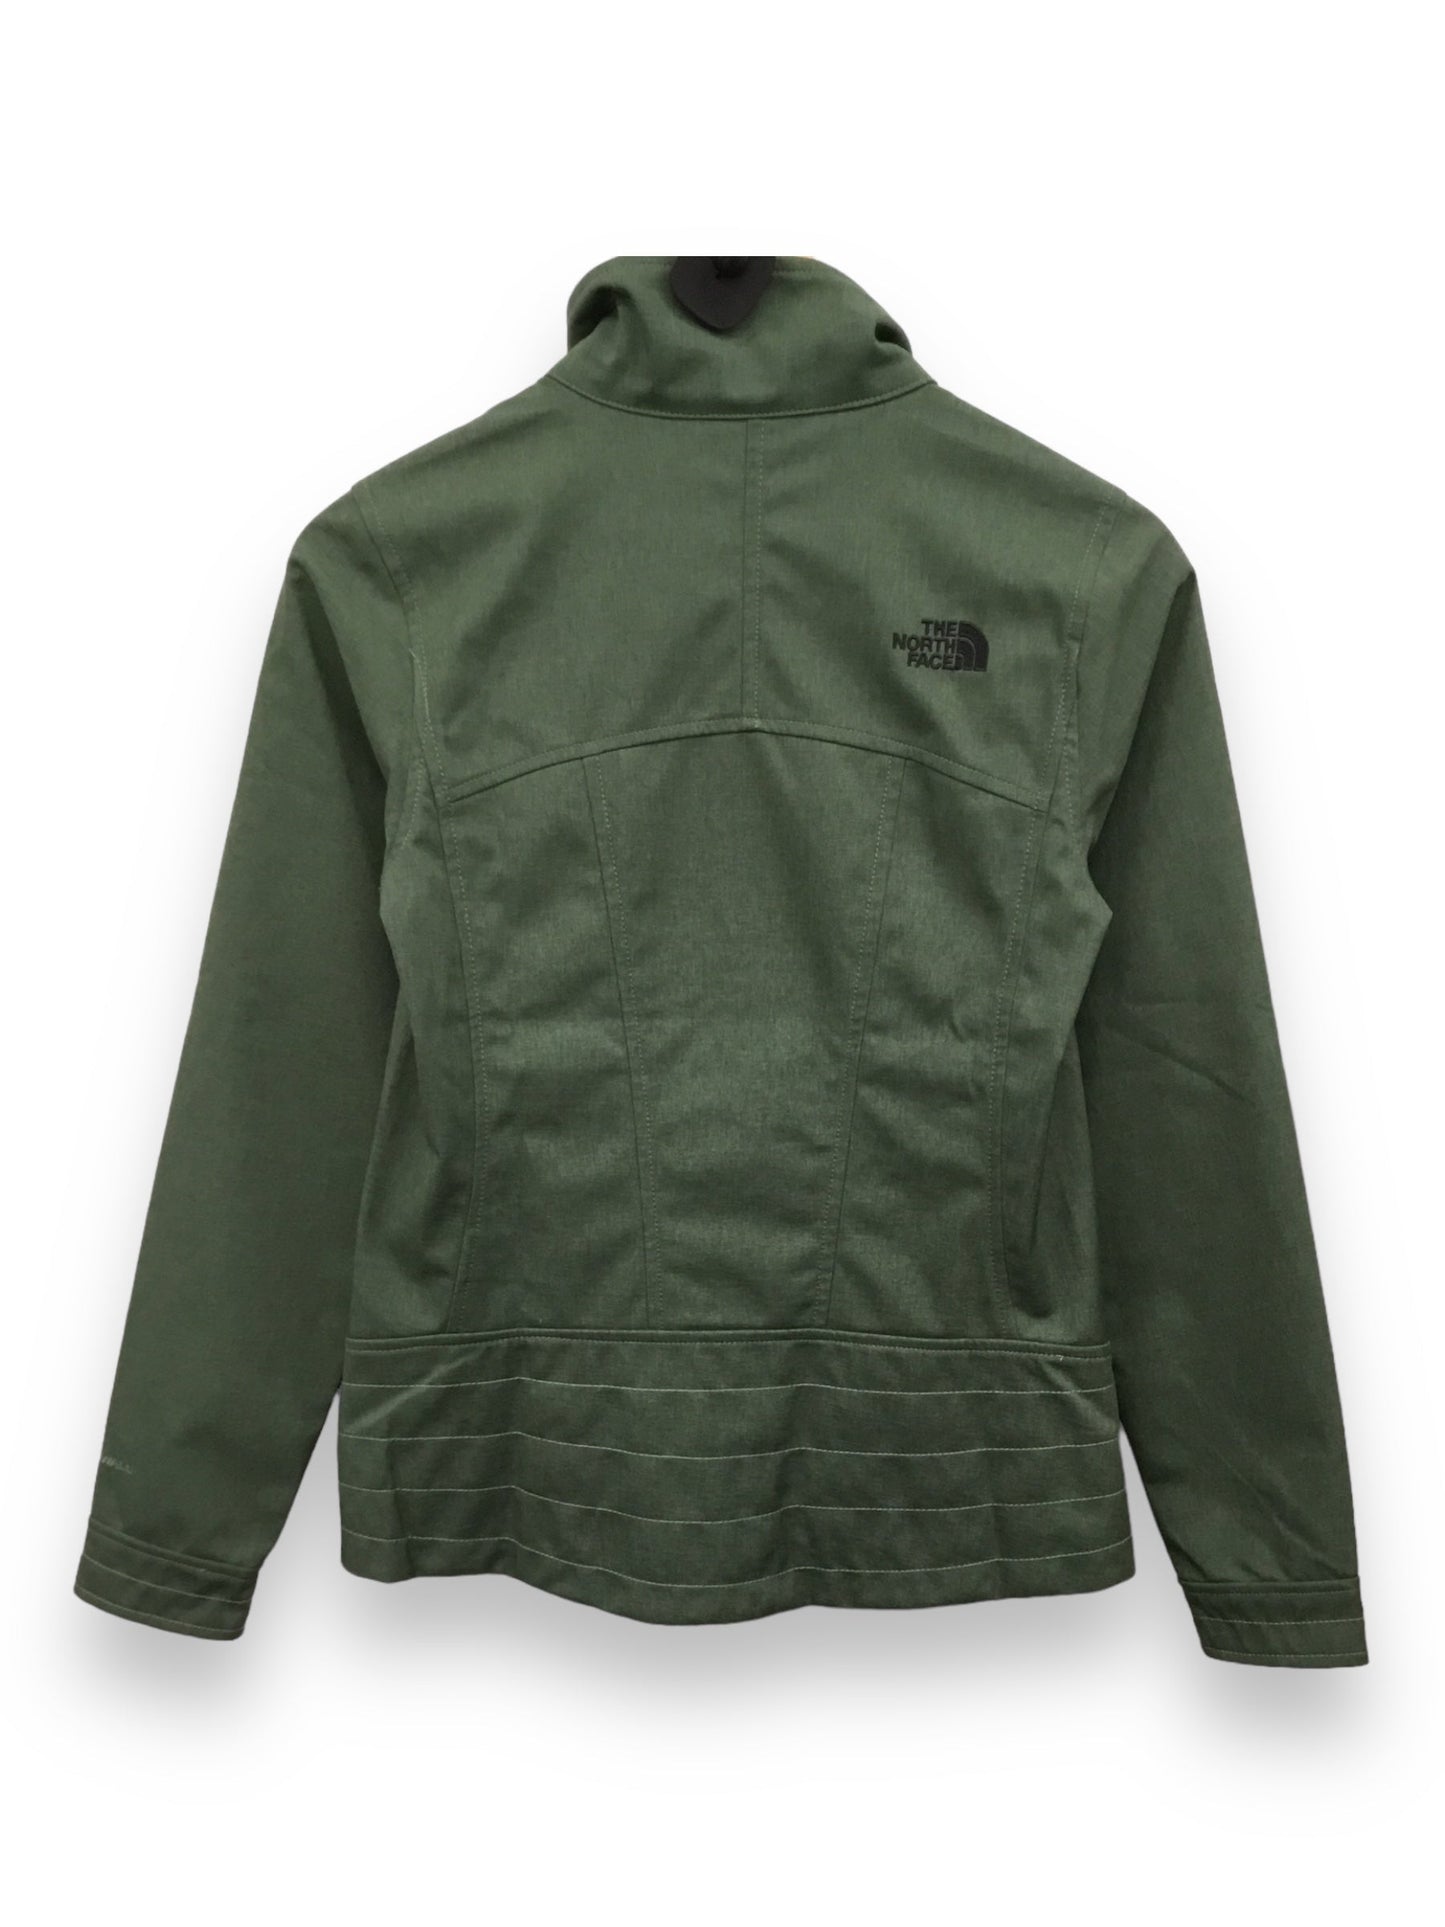 Green Jacket Other The North Face, Size S